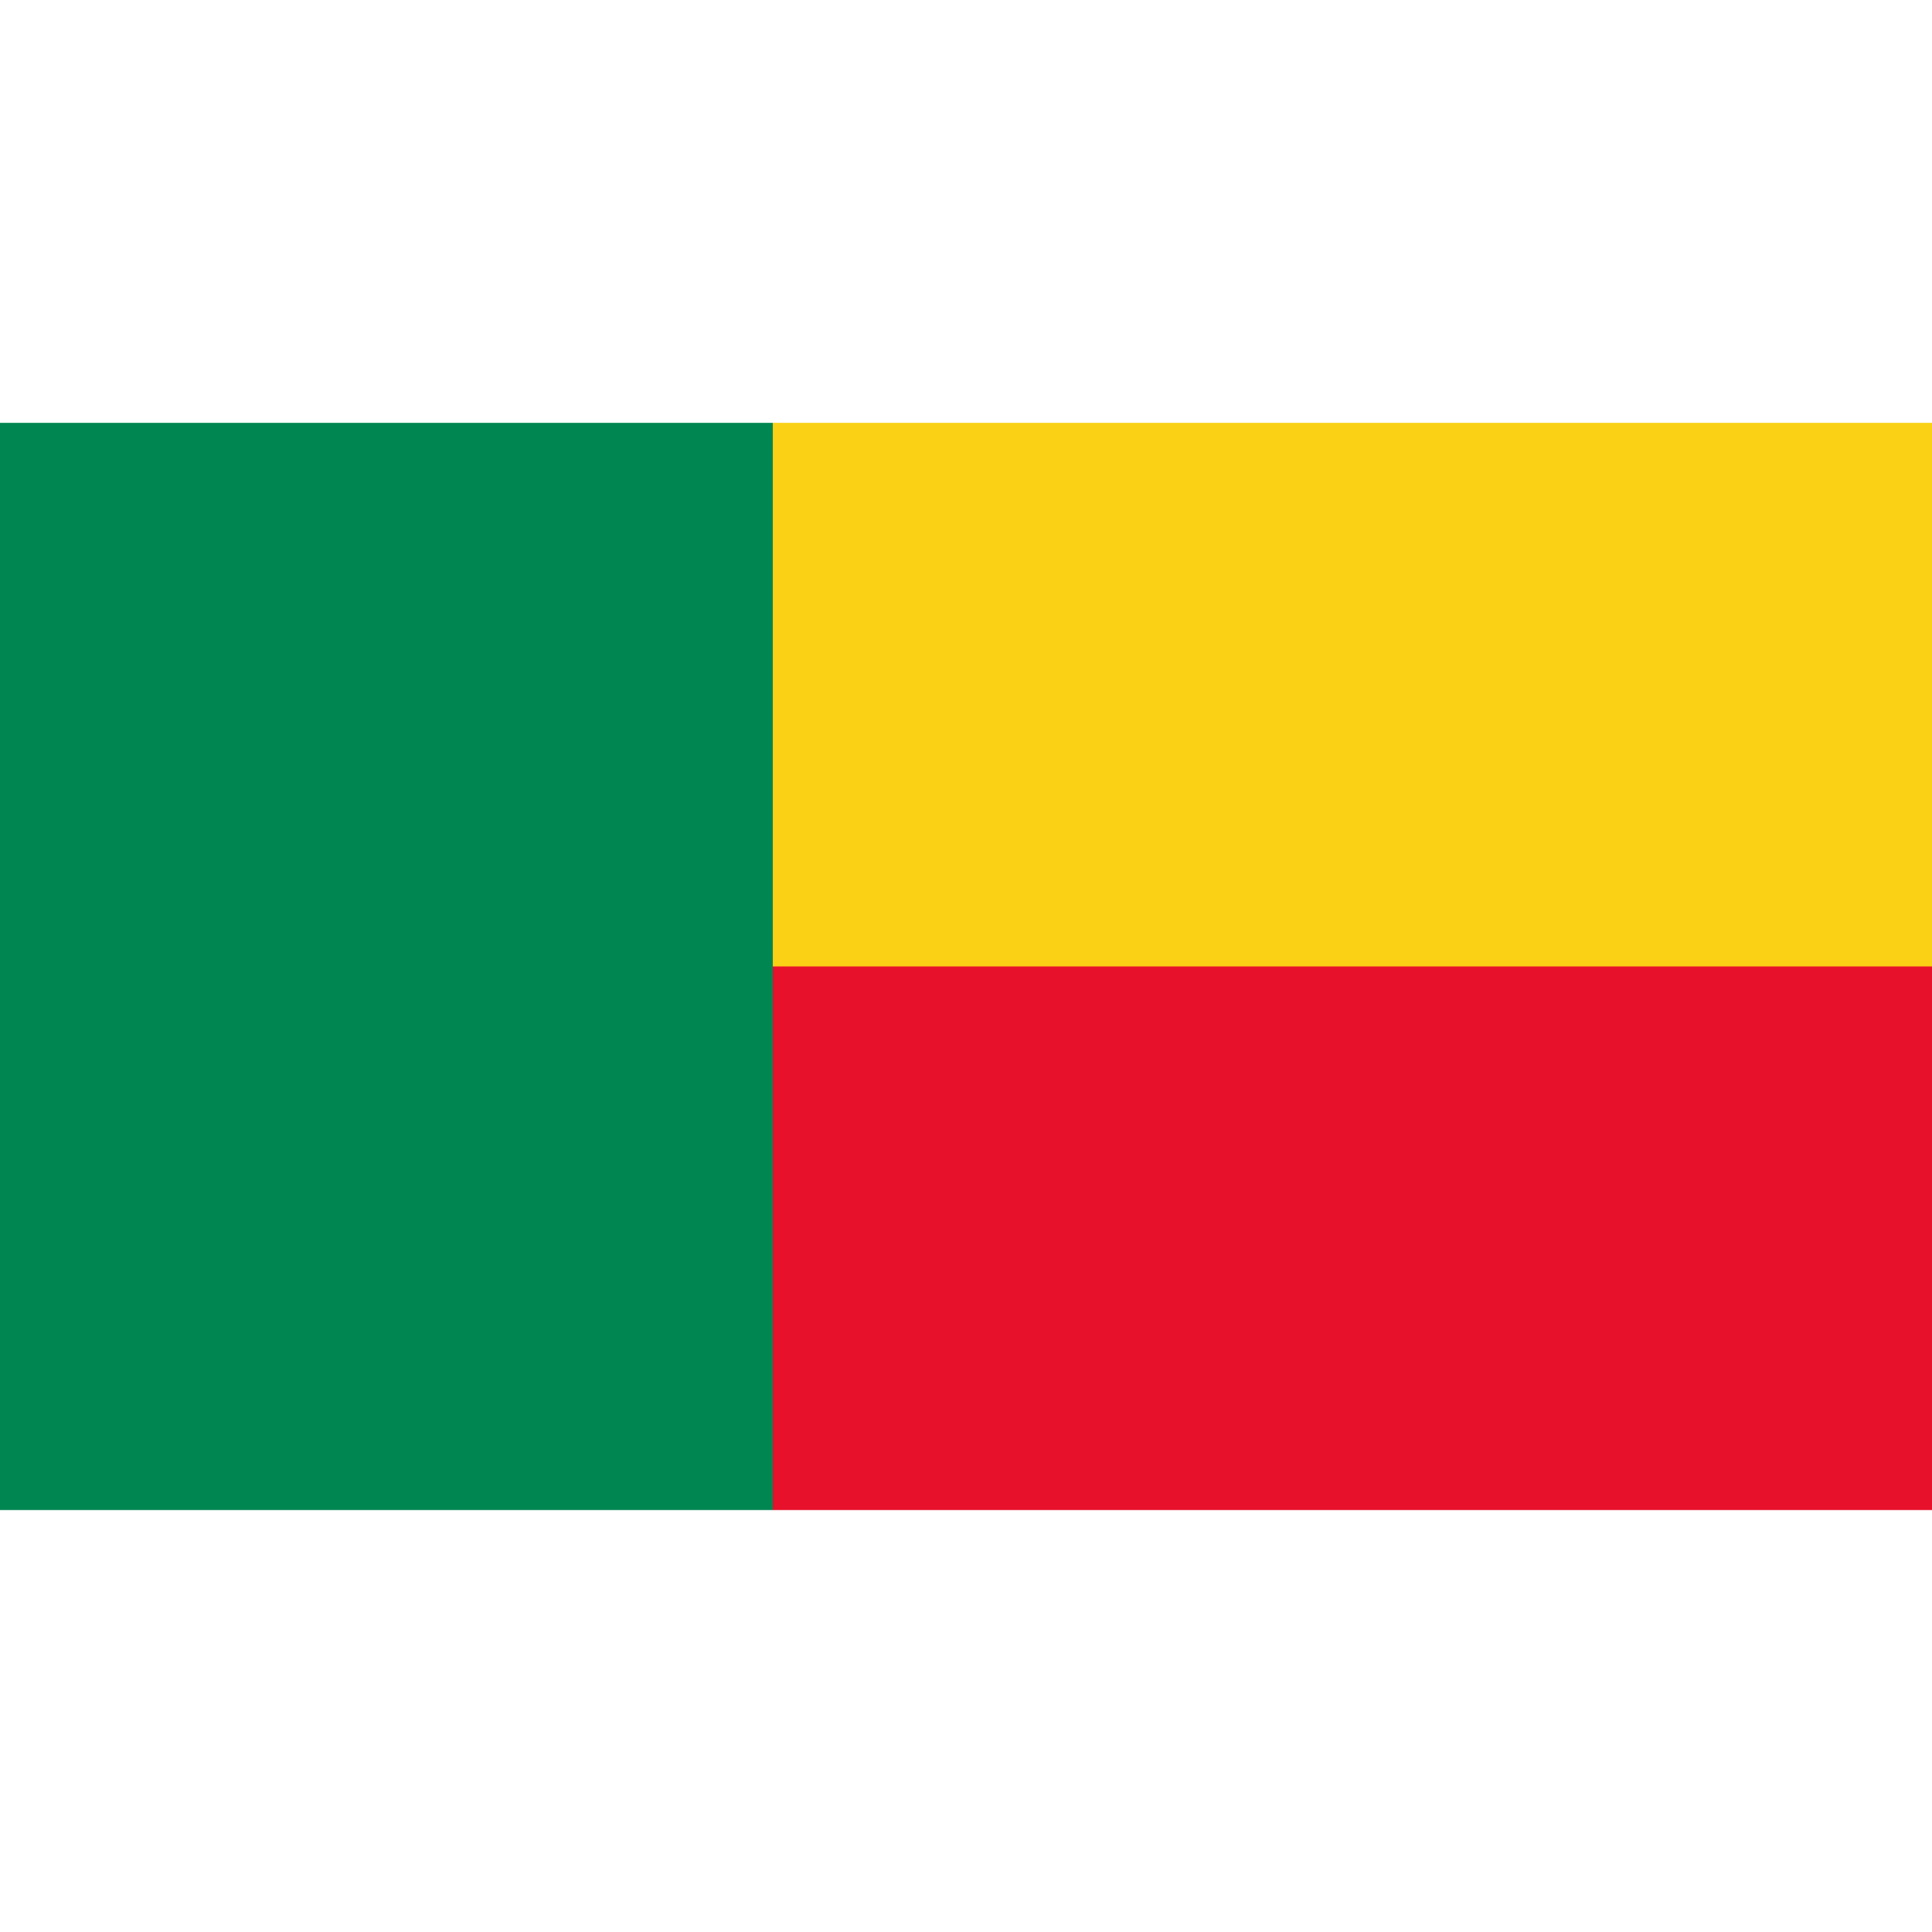 The flag of Benin consists of a green vertical band on the left and two horizontal yellow and red bands on the right side.